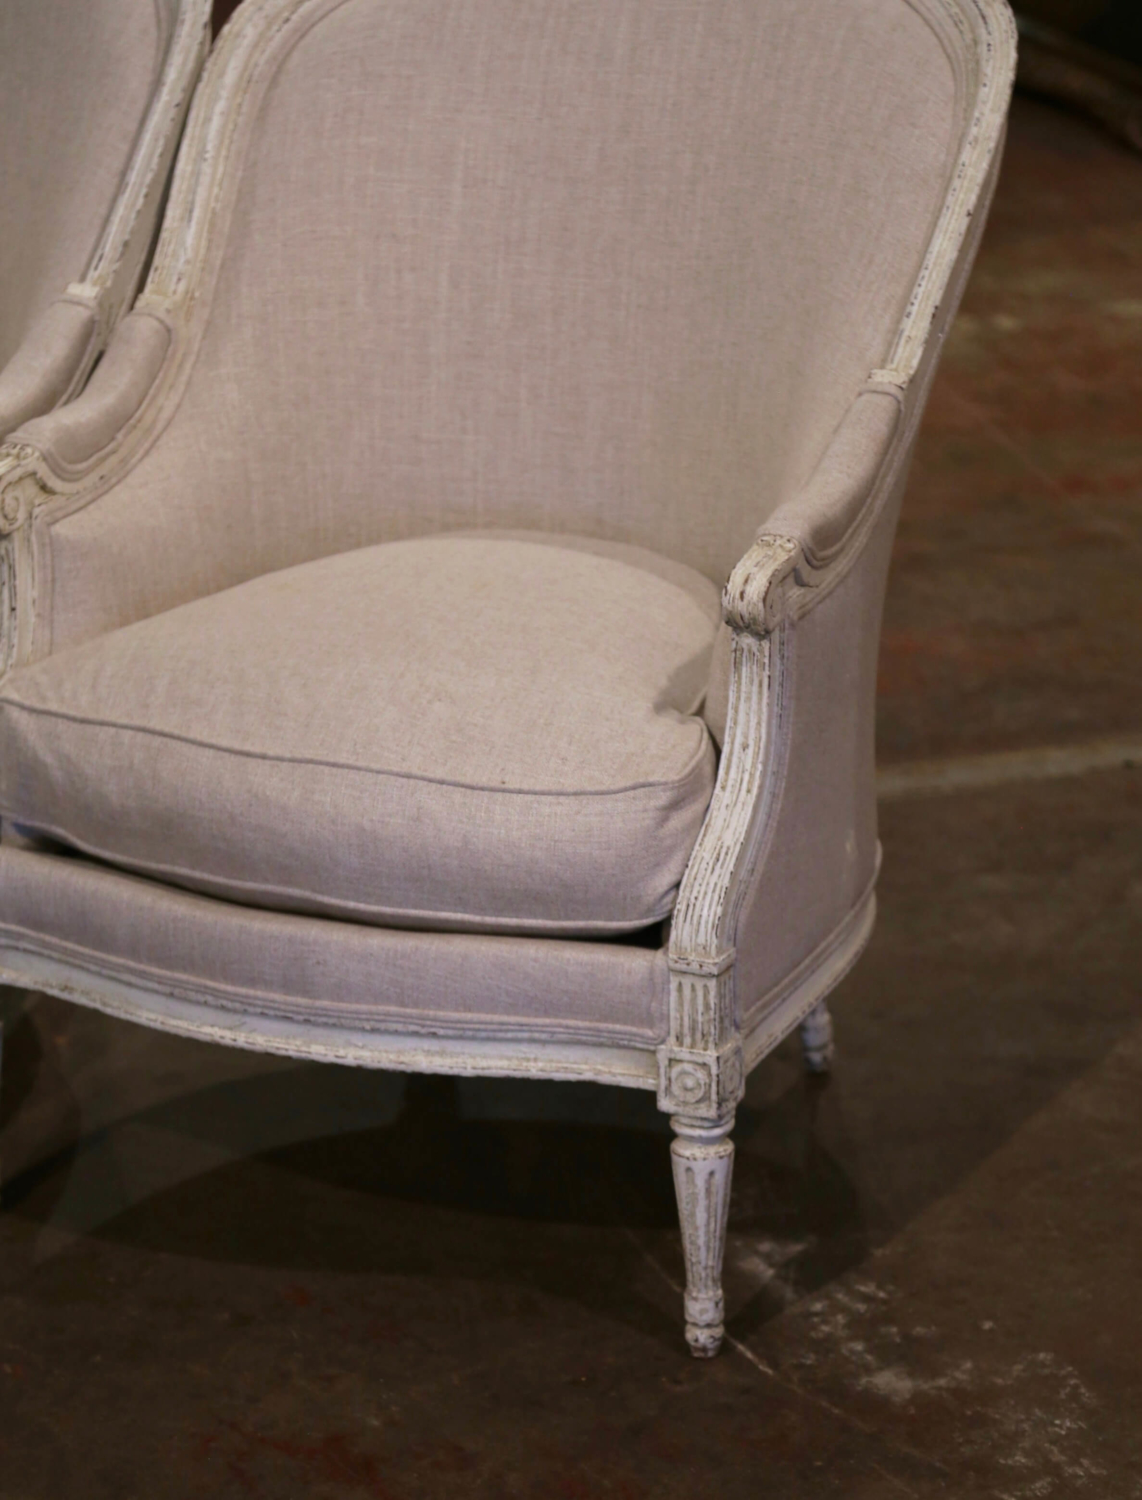 Pair of Antique French Parcel Paint Cabriolet Armchairs, Late 19th